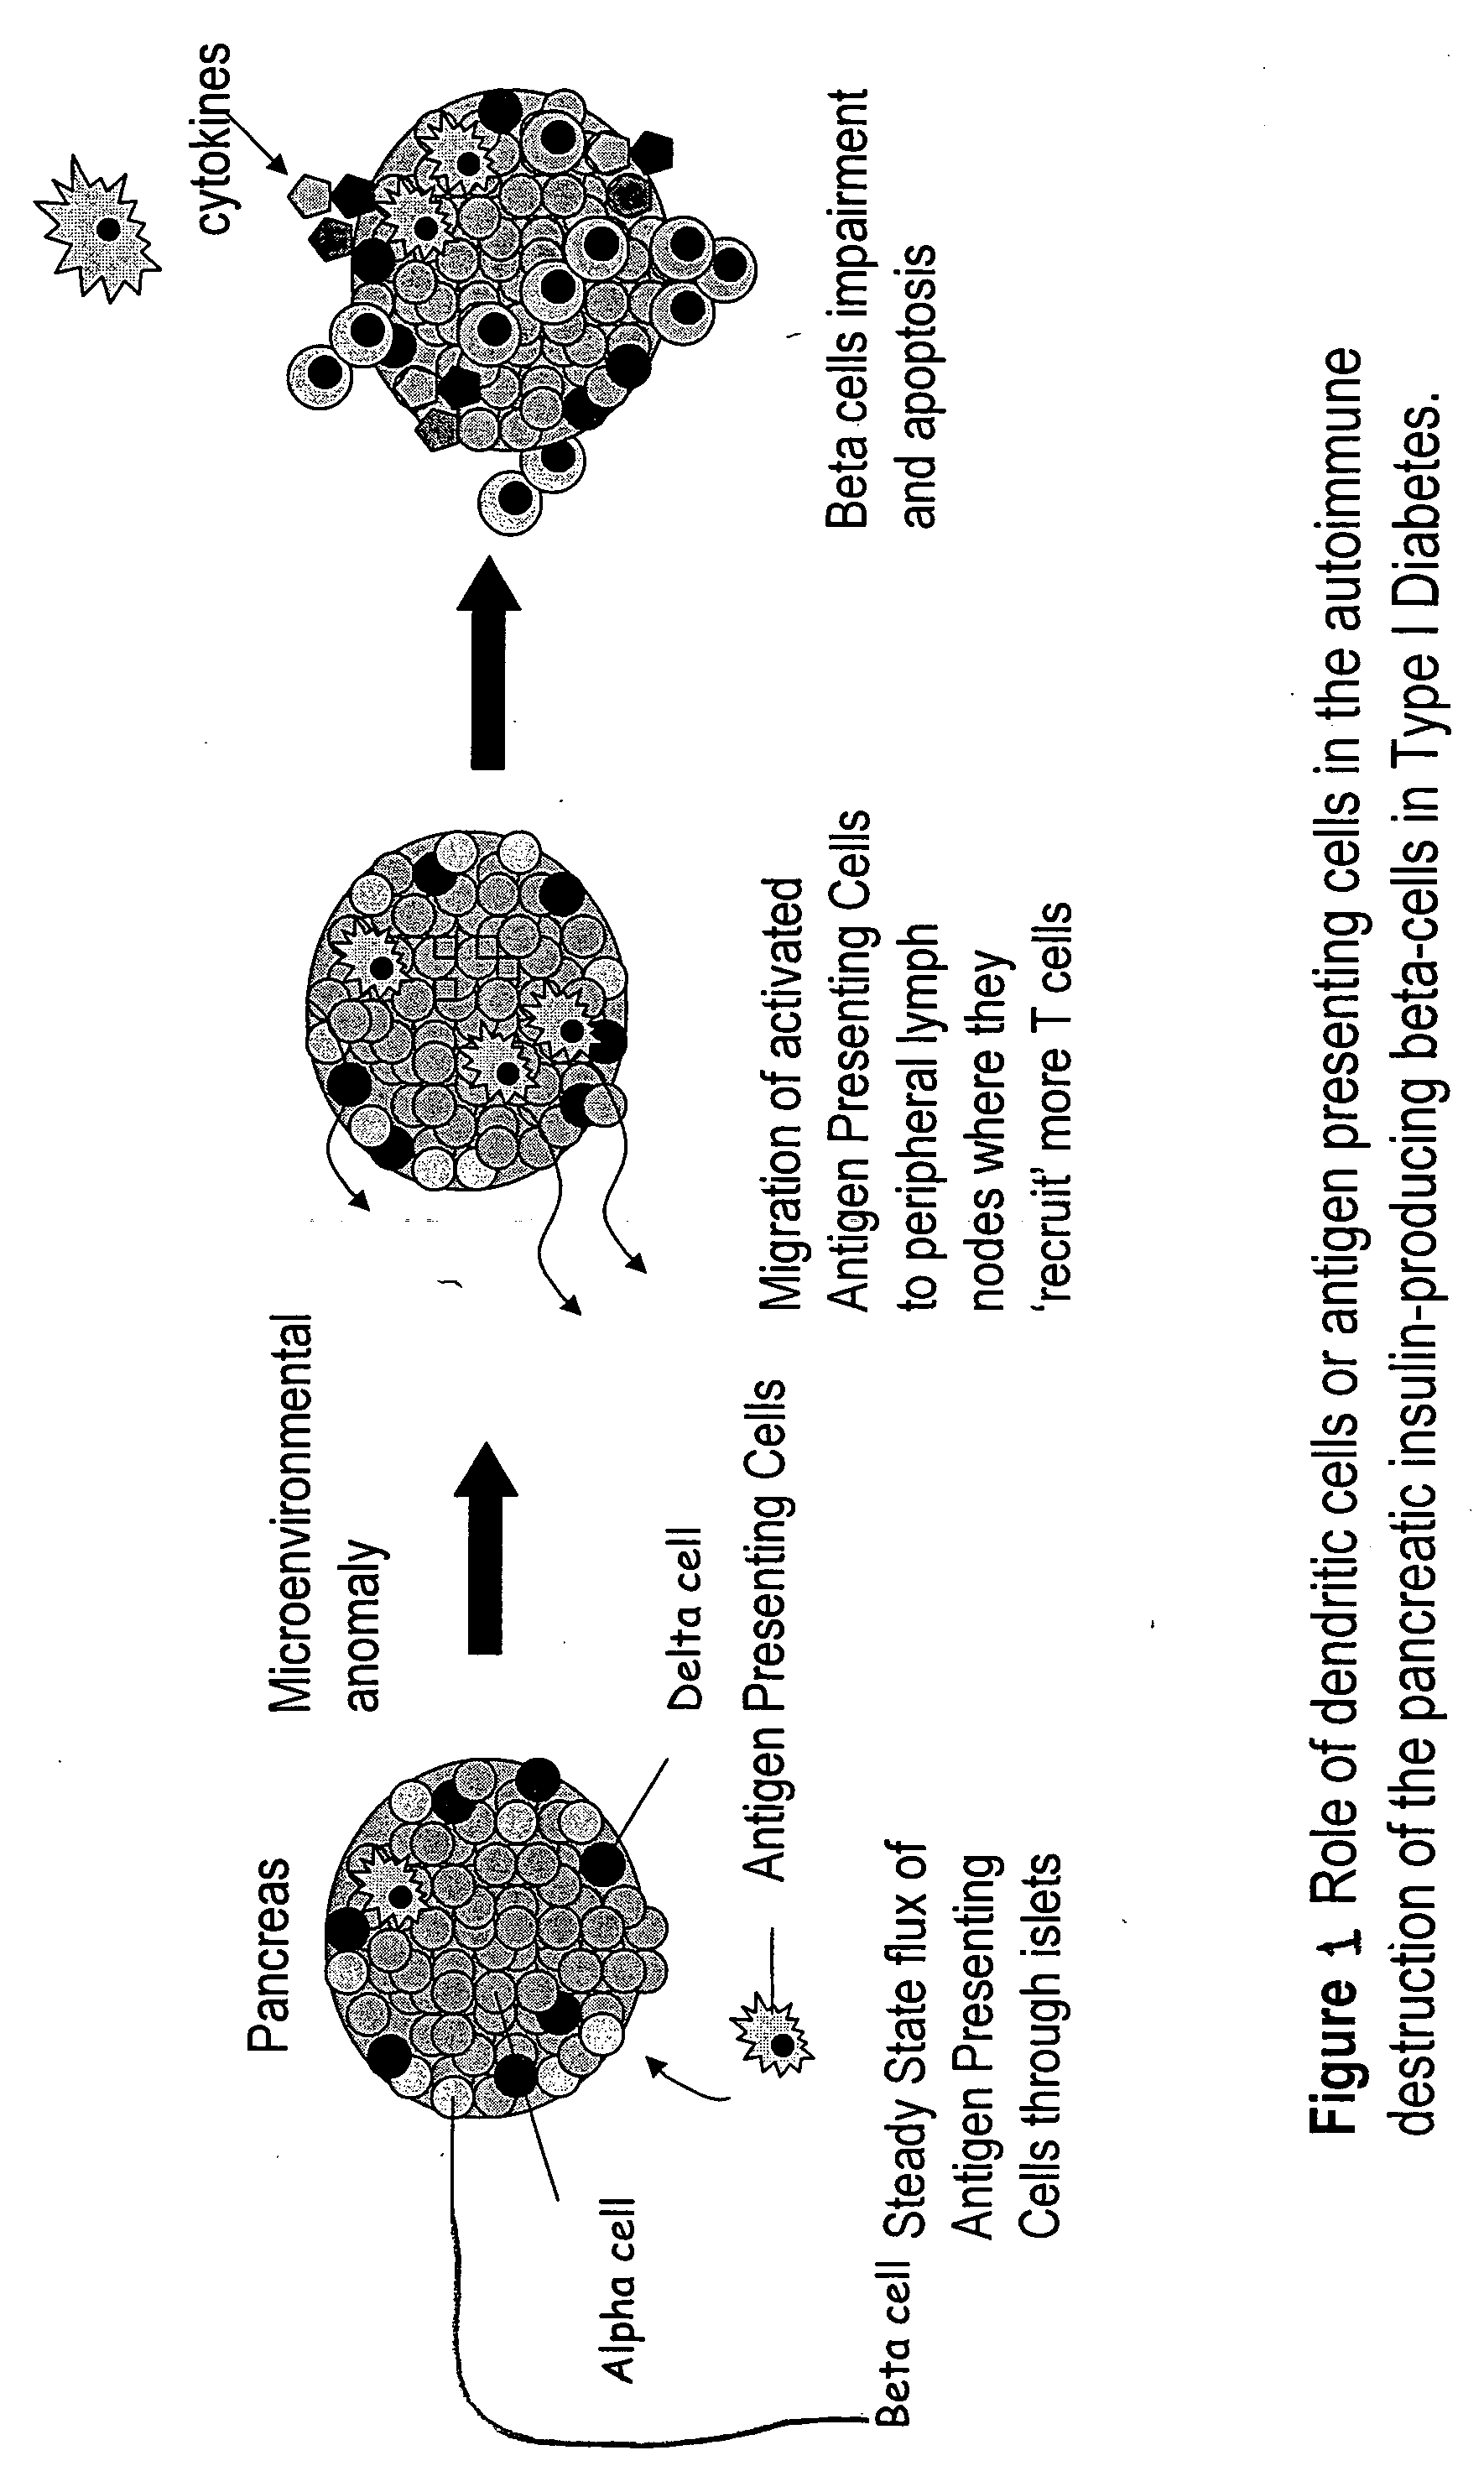 Delivery of as-oligonucleotide microspheres to induce dendritic cell tolerance for the treatment of autoimmune type 1 diabetes